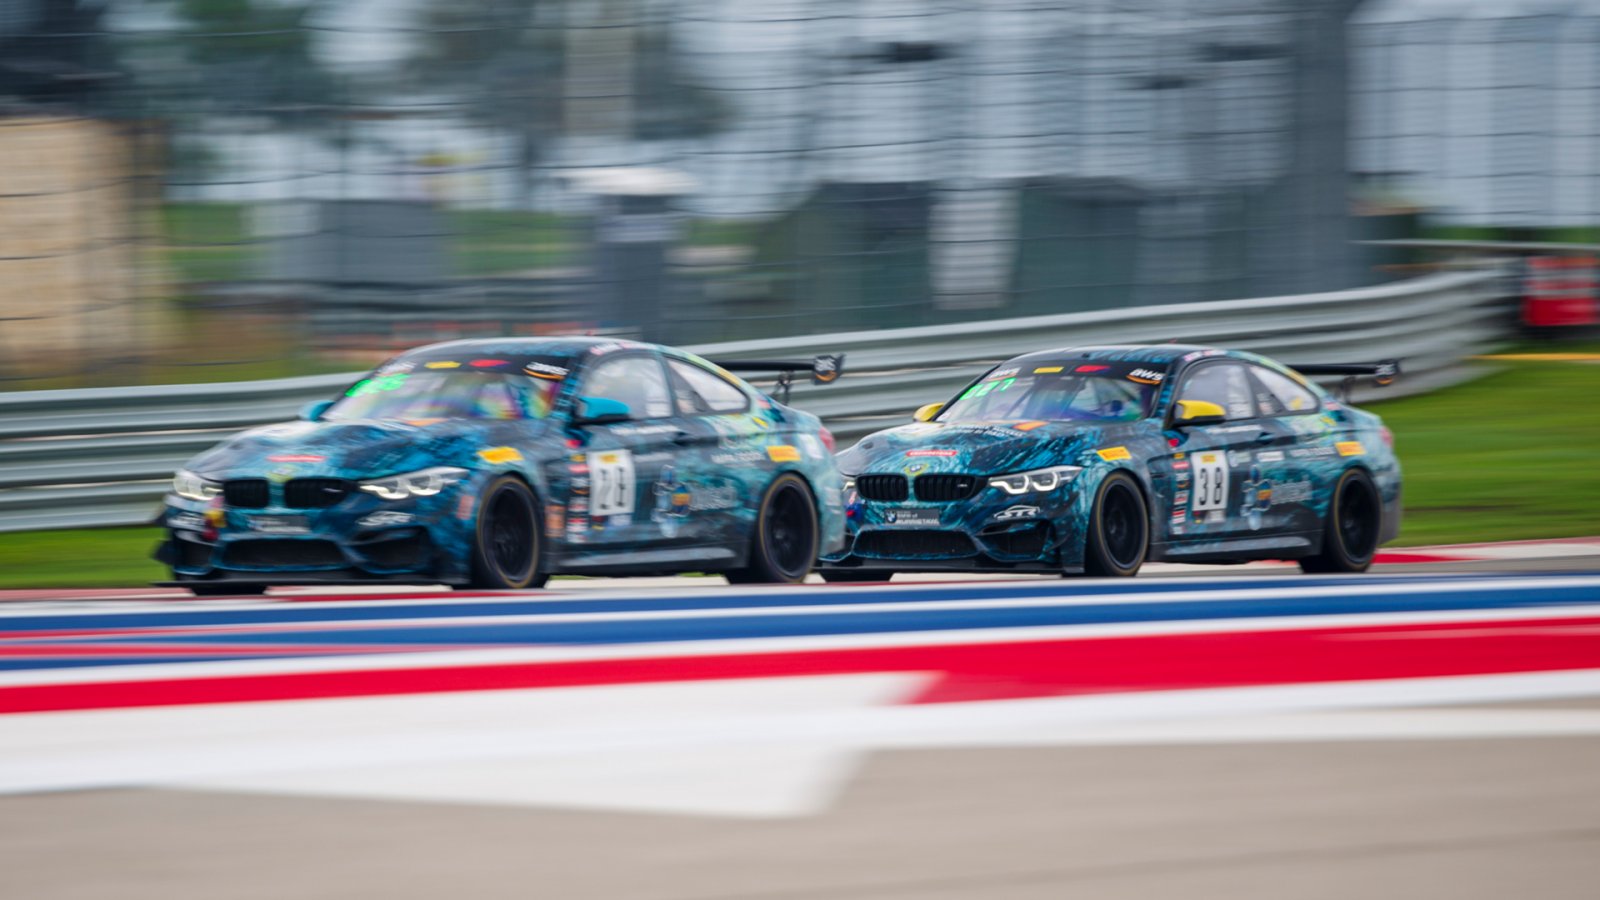 Two podiums, two top fives, and a returning race winner in a busy weekend for ST Racing at COTA